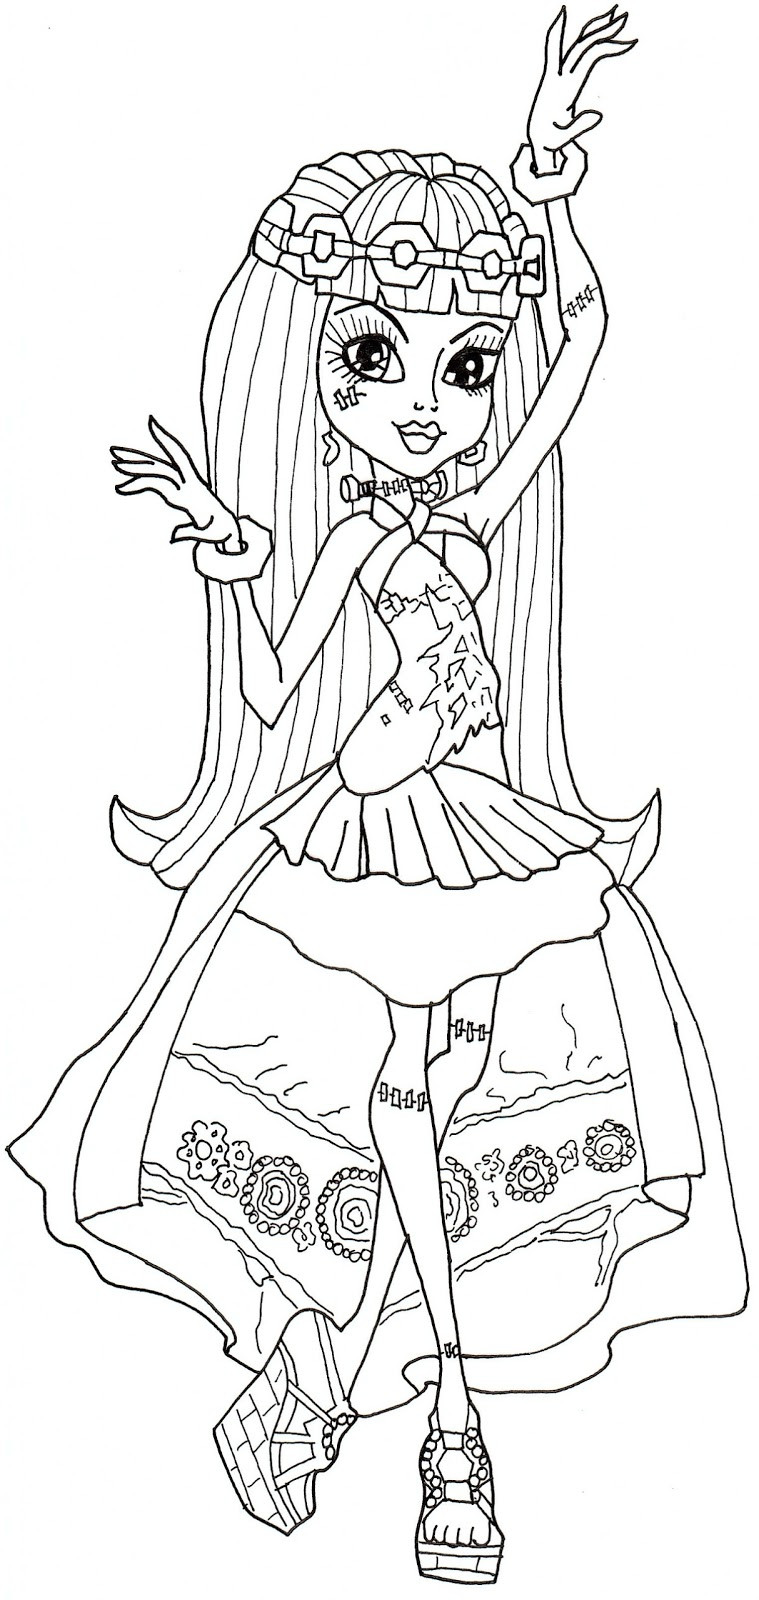 Free Printable Coloring Sheets Monster High
 Free Printable Monster High Coloring Pages June 2013